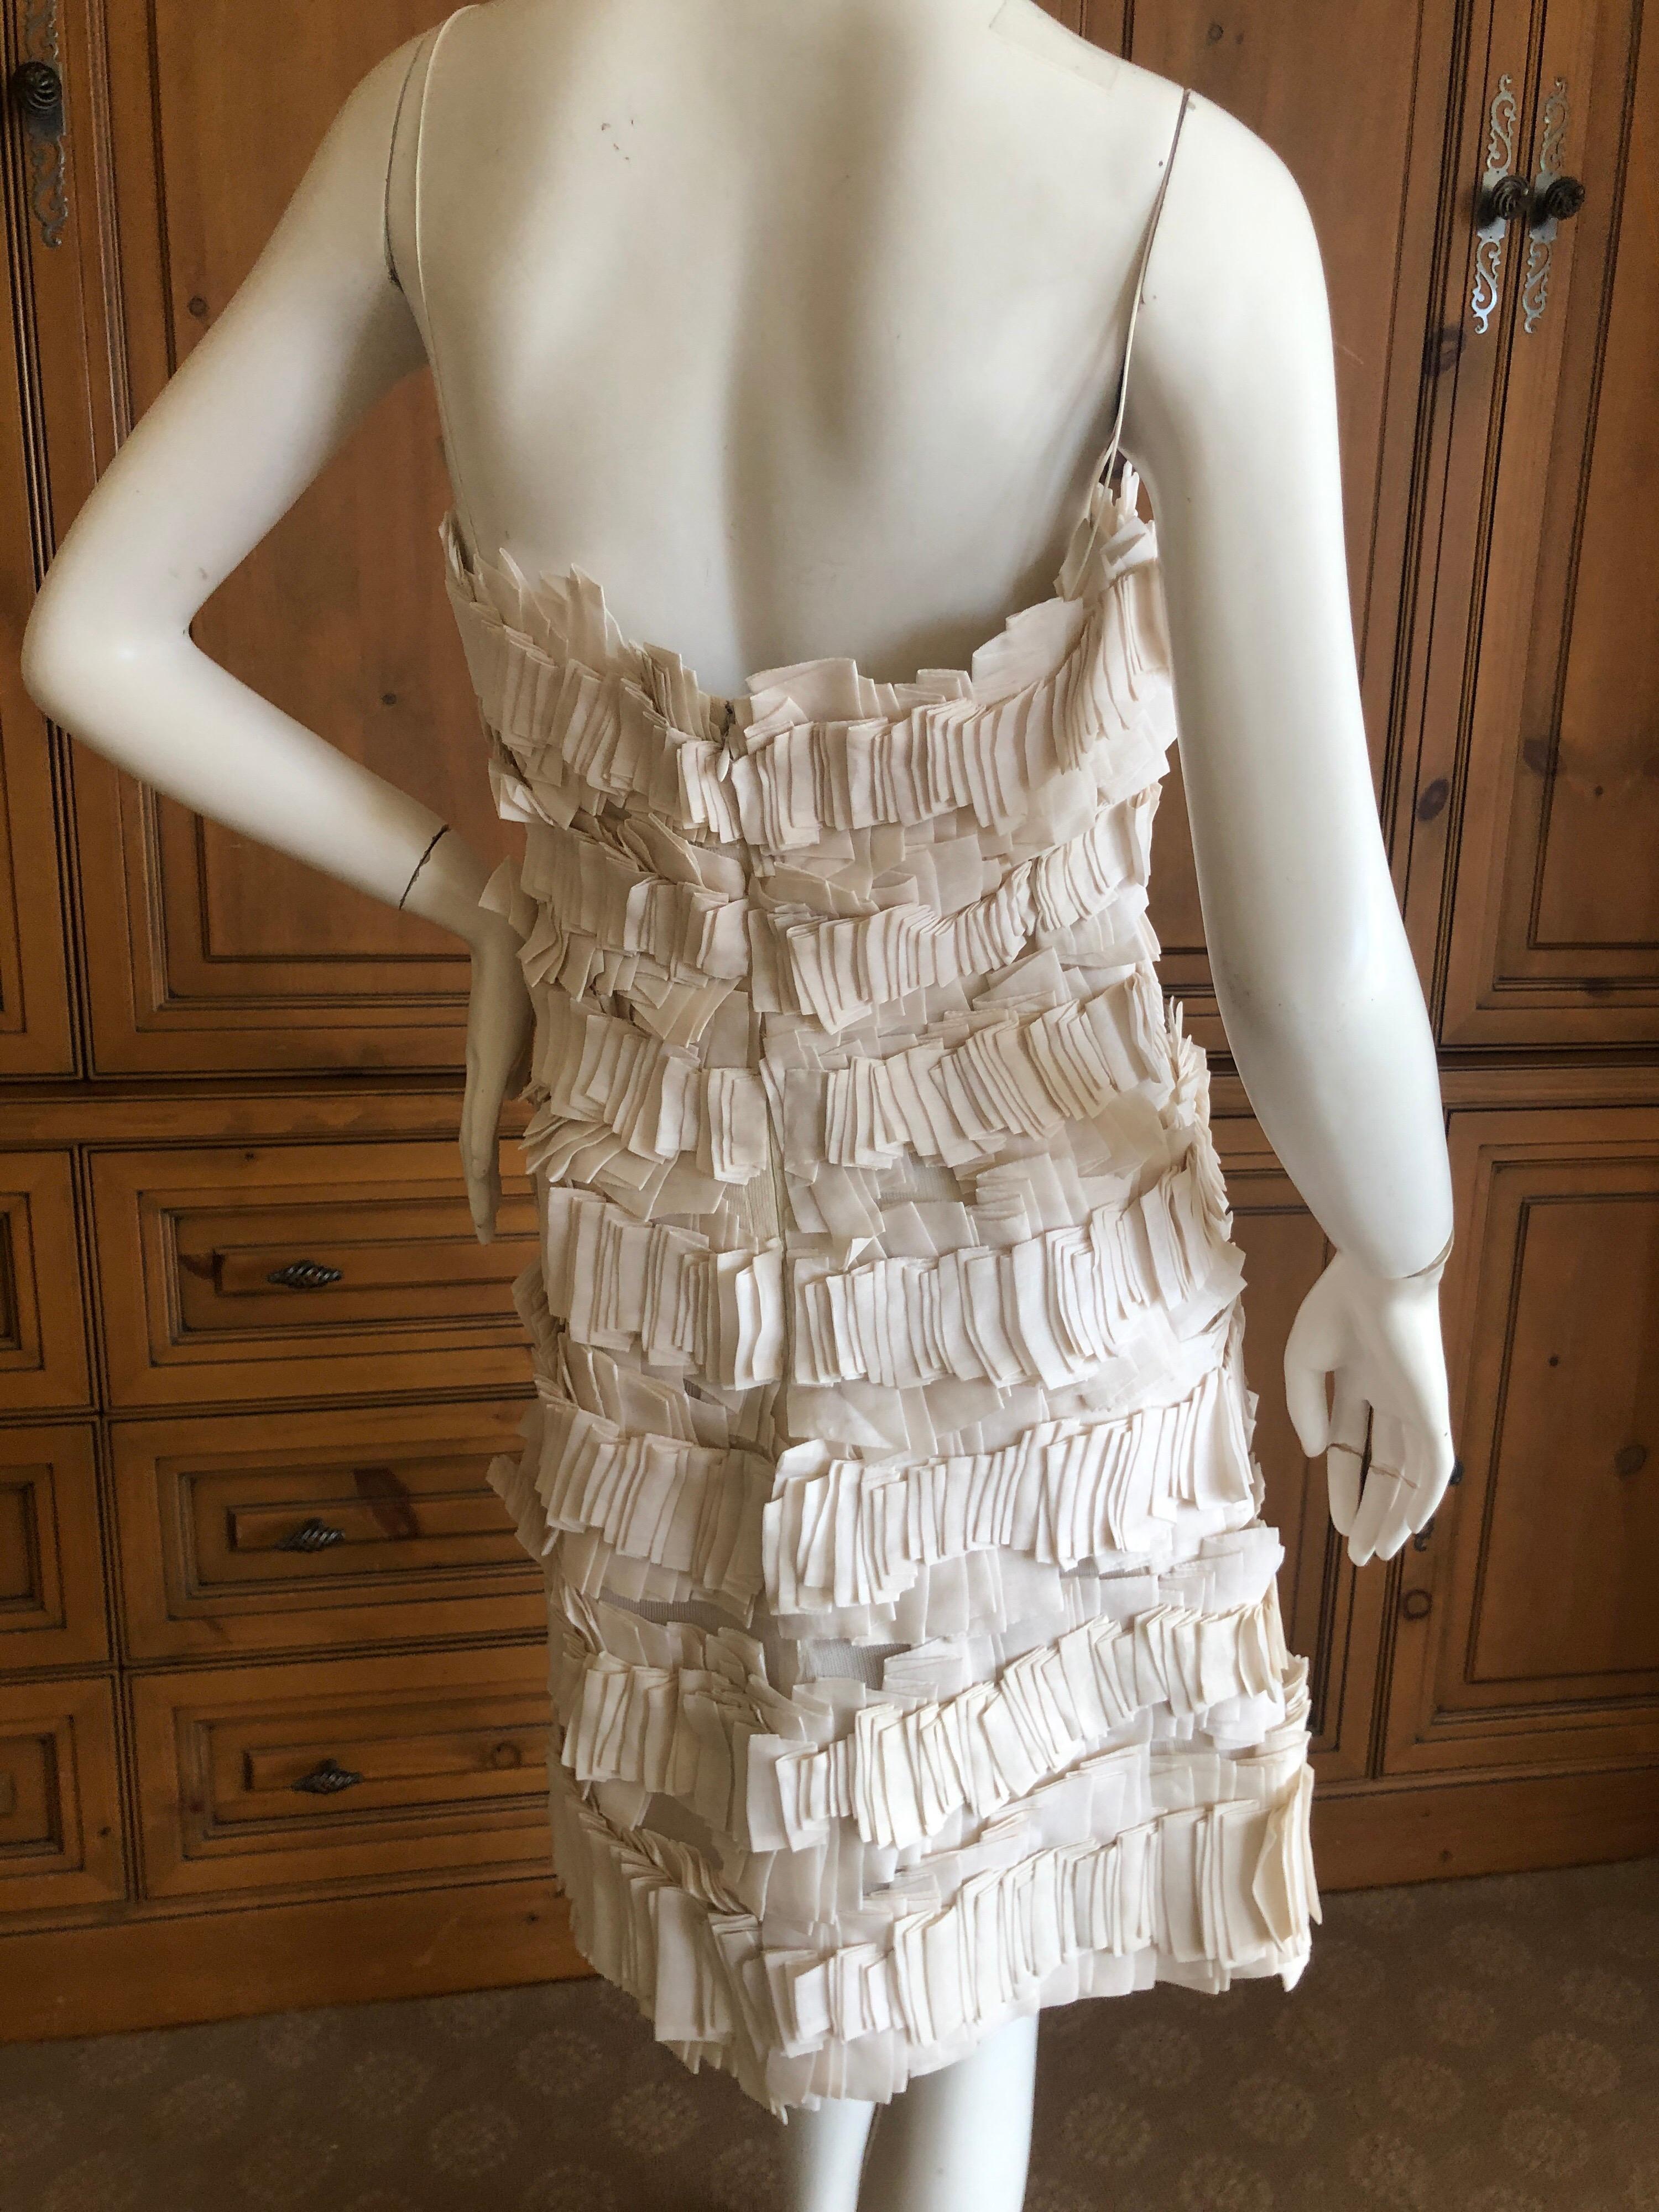 Chado Ralph Rucci Ivory Origami on Mesh Dress.
This is amazing, but hard to capture all the details in the photos.
Please use the zoom feature to see details. 
Size 4
Bust 34